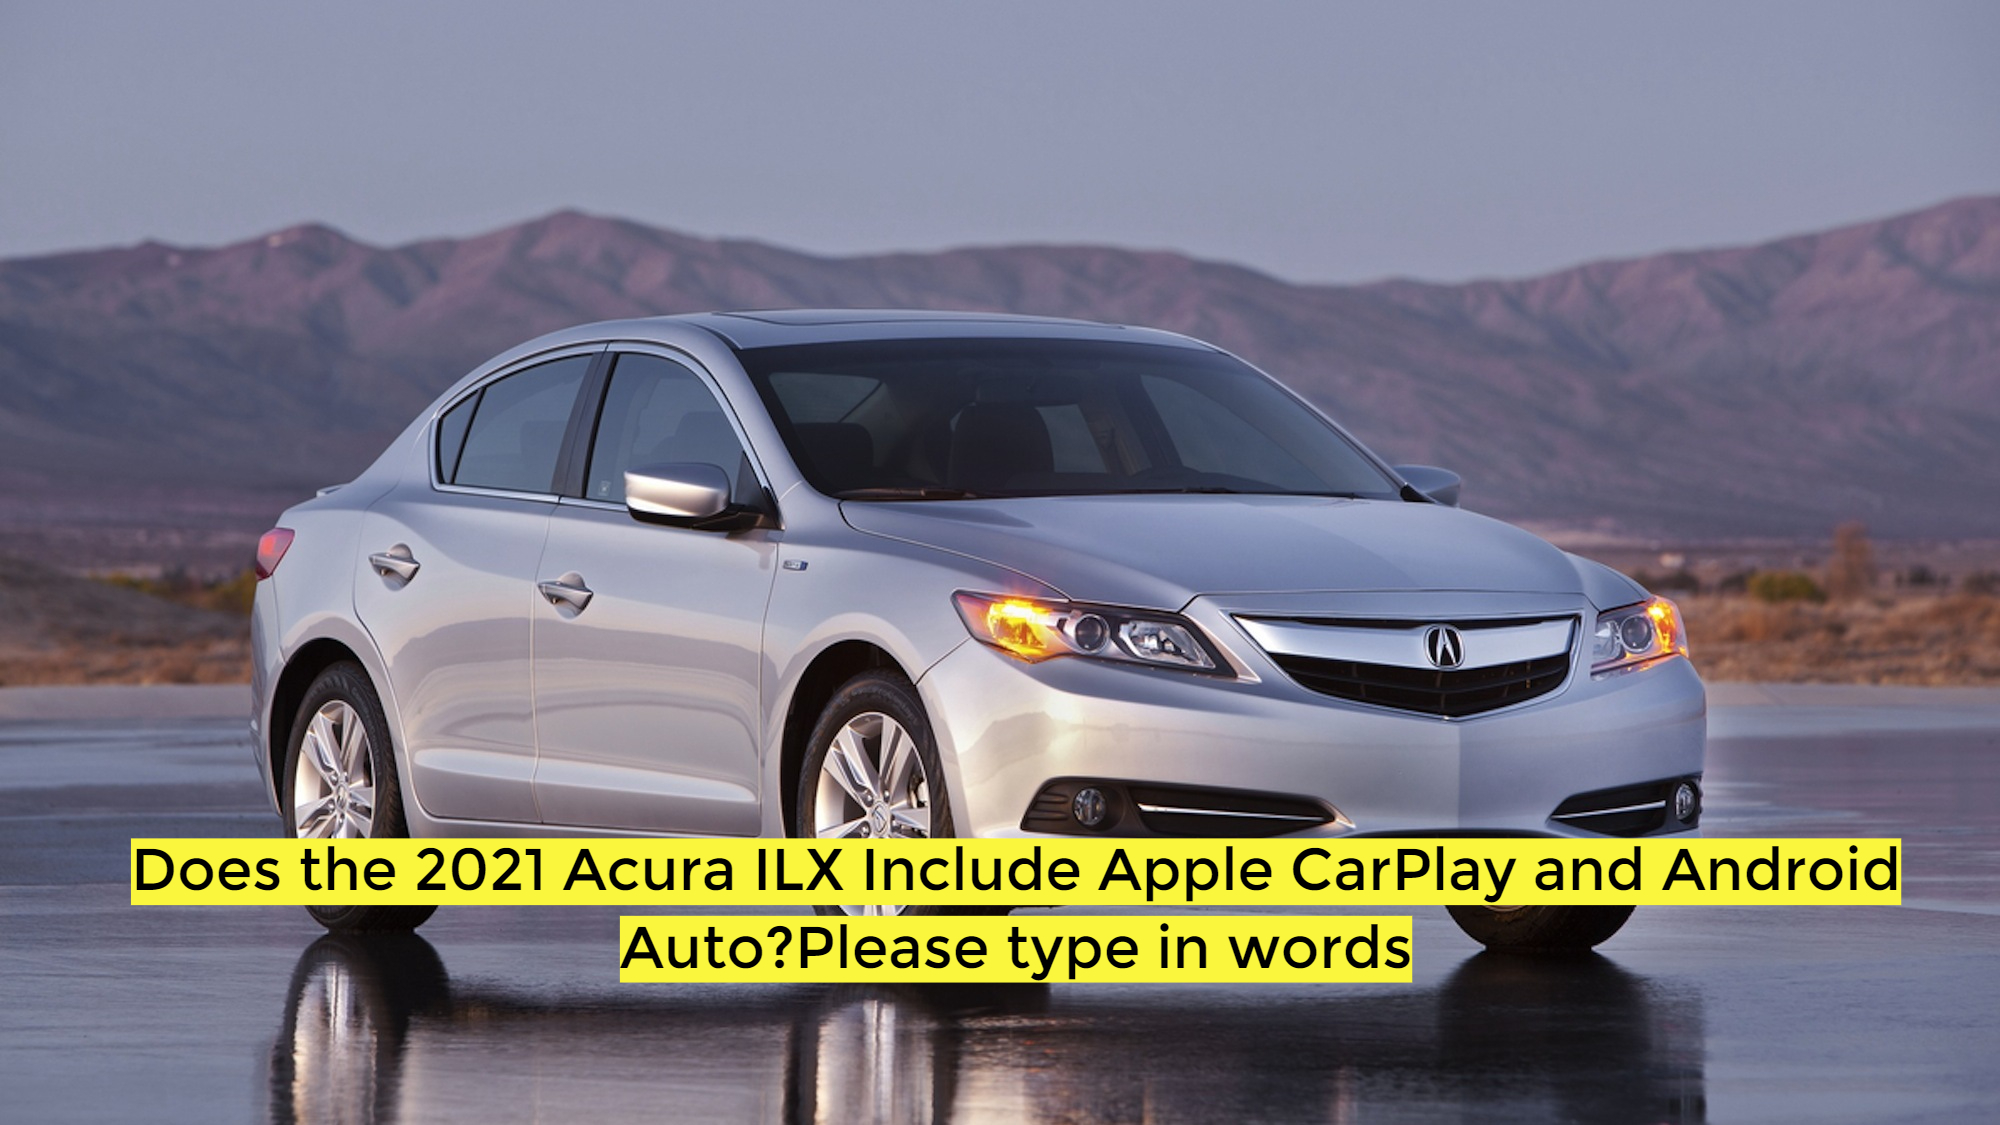 Does the 2021 Acura ILX Include Apple CarPlay and Android Auto?